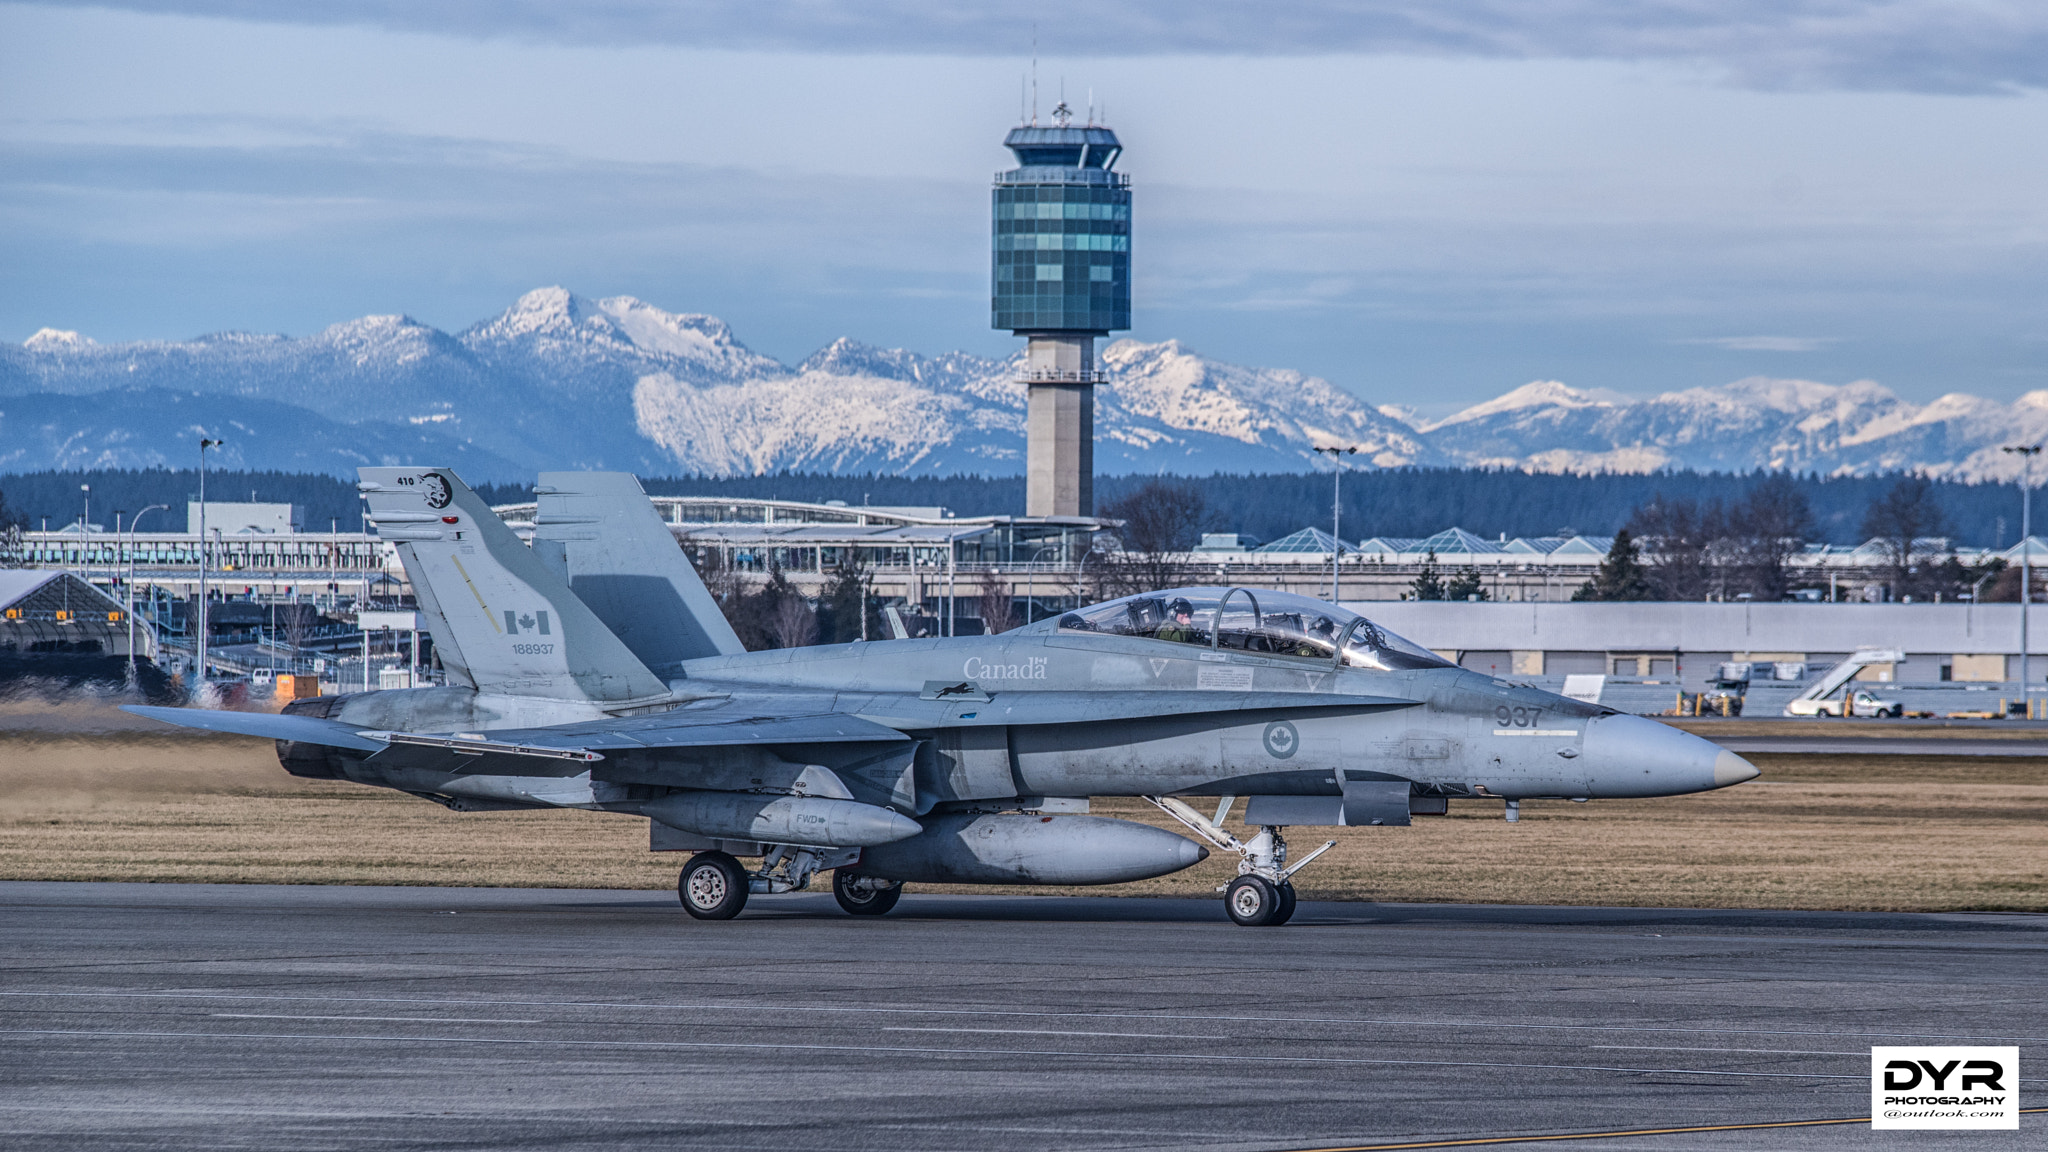 Pentax K-1 sample photo. Canadian forces, out at yvr airport. photography